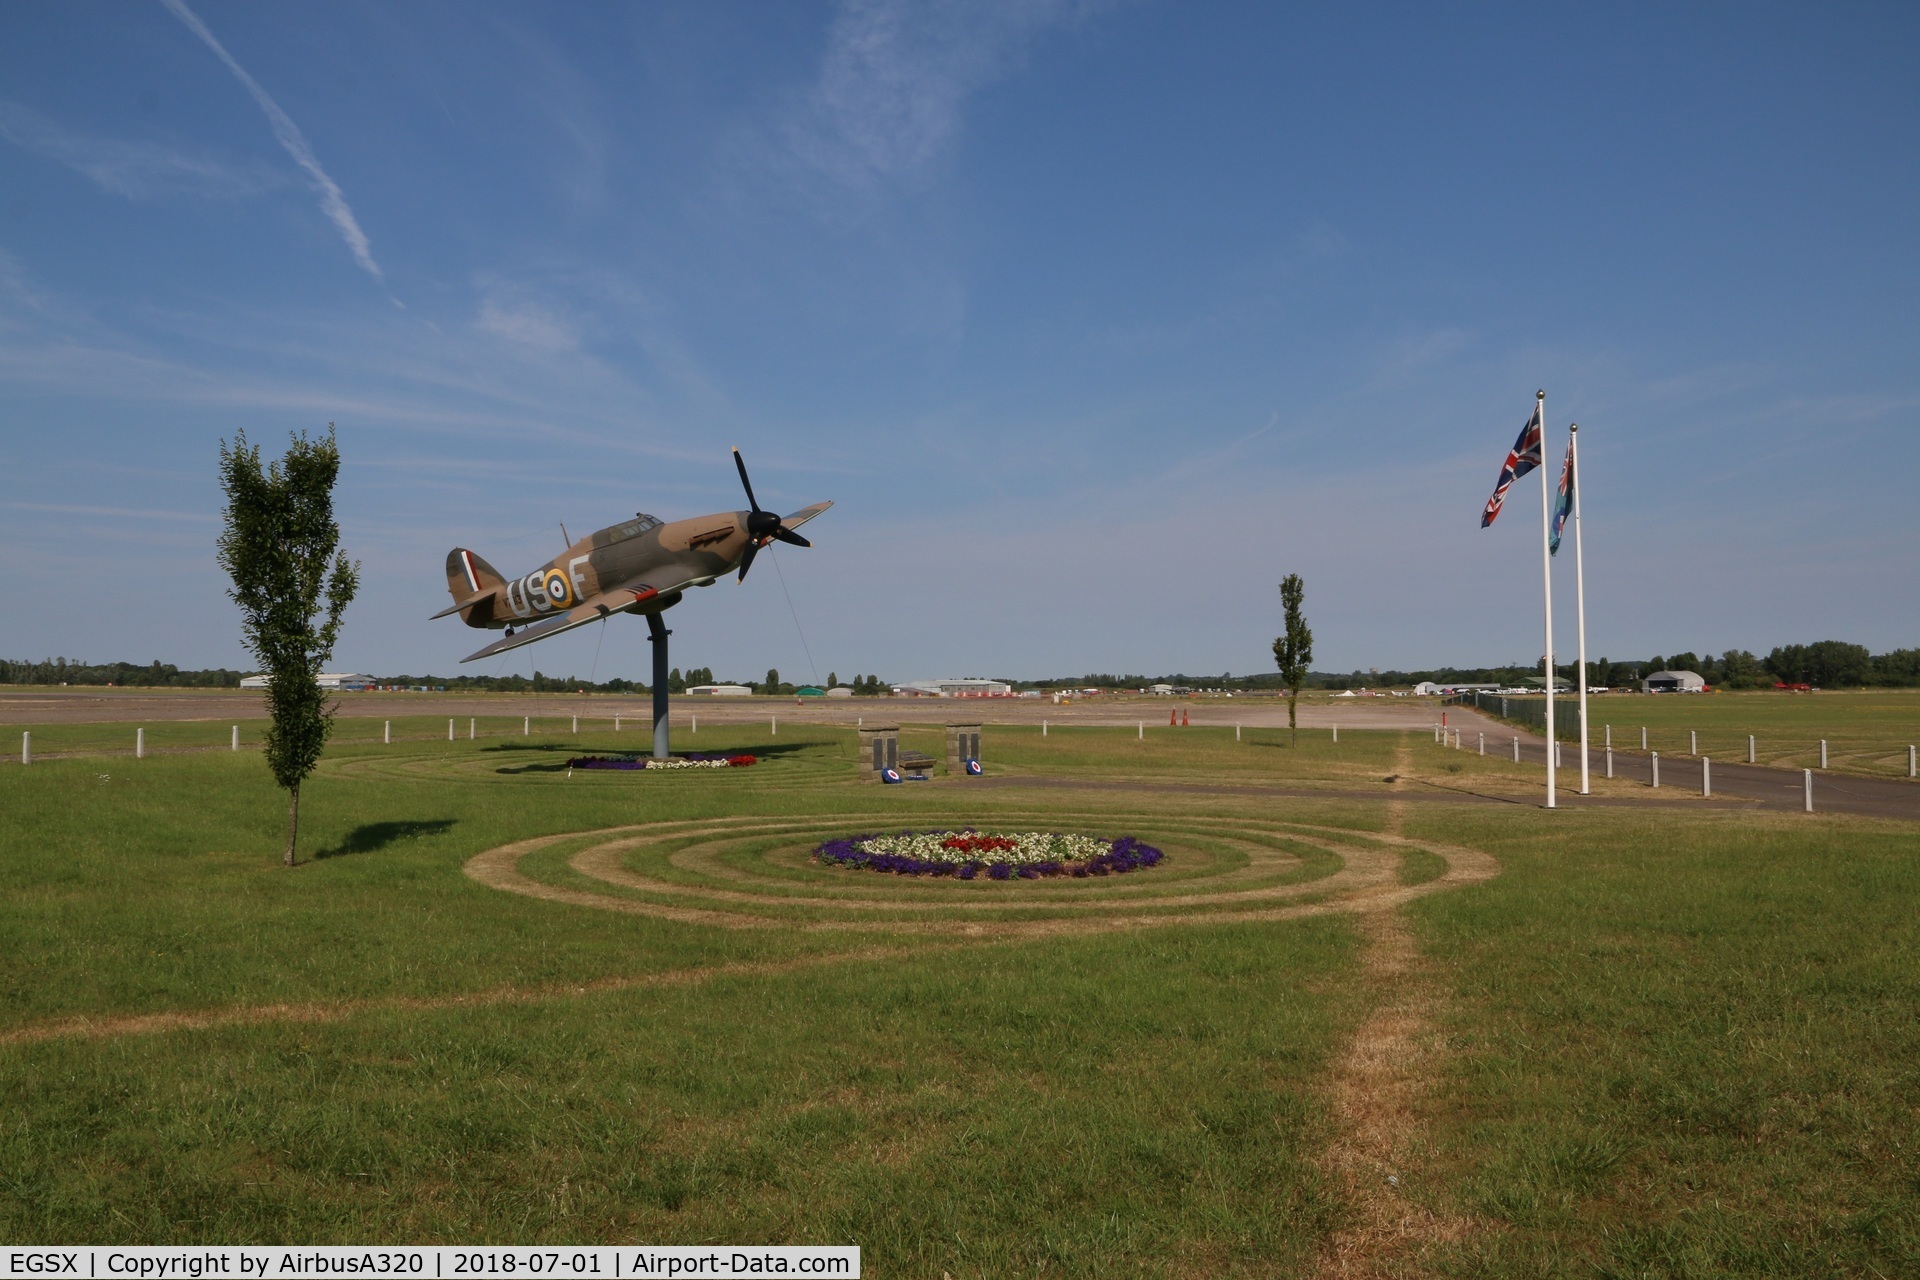 North Weald Airfield Airport, North Weald, England United Kingdom (EGSX) - Gate Guardian